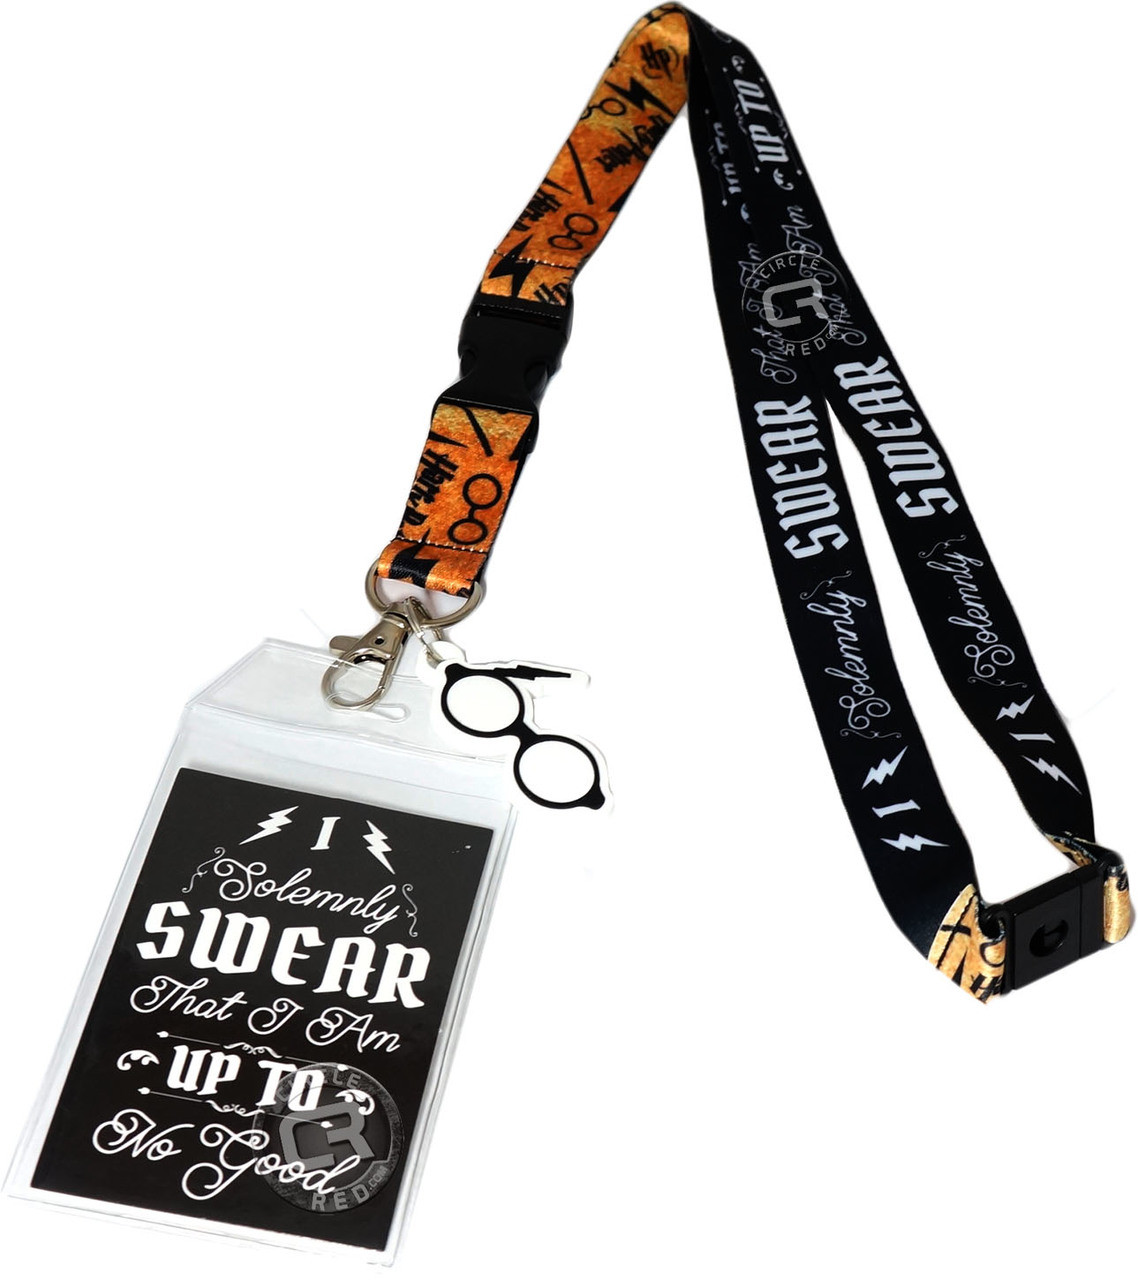 https://cdn11.bigcommerce.com/s-17iwlonkmo/images/stencil/1280x1280/products/250/576/harry-potter-i-solemnly-swear-script-lanyard-with-id-holder-charm-15__07167.1486182300.jpg?c=2